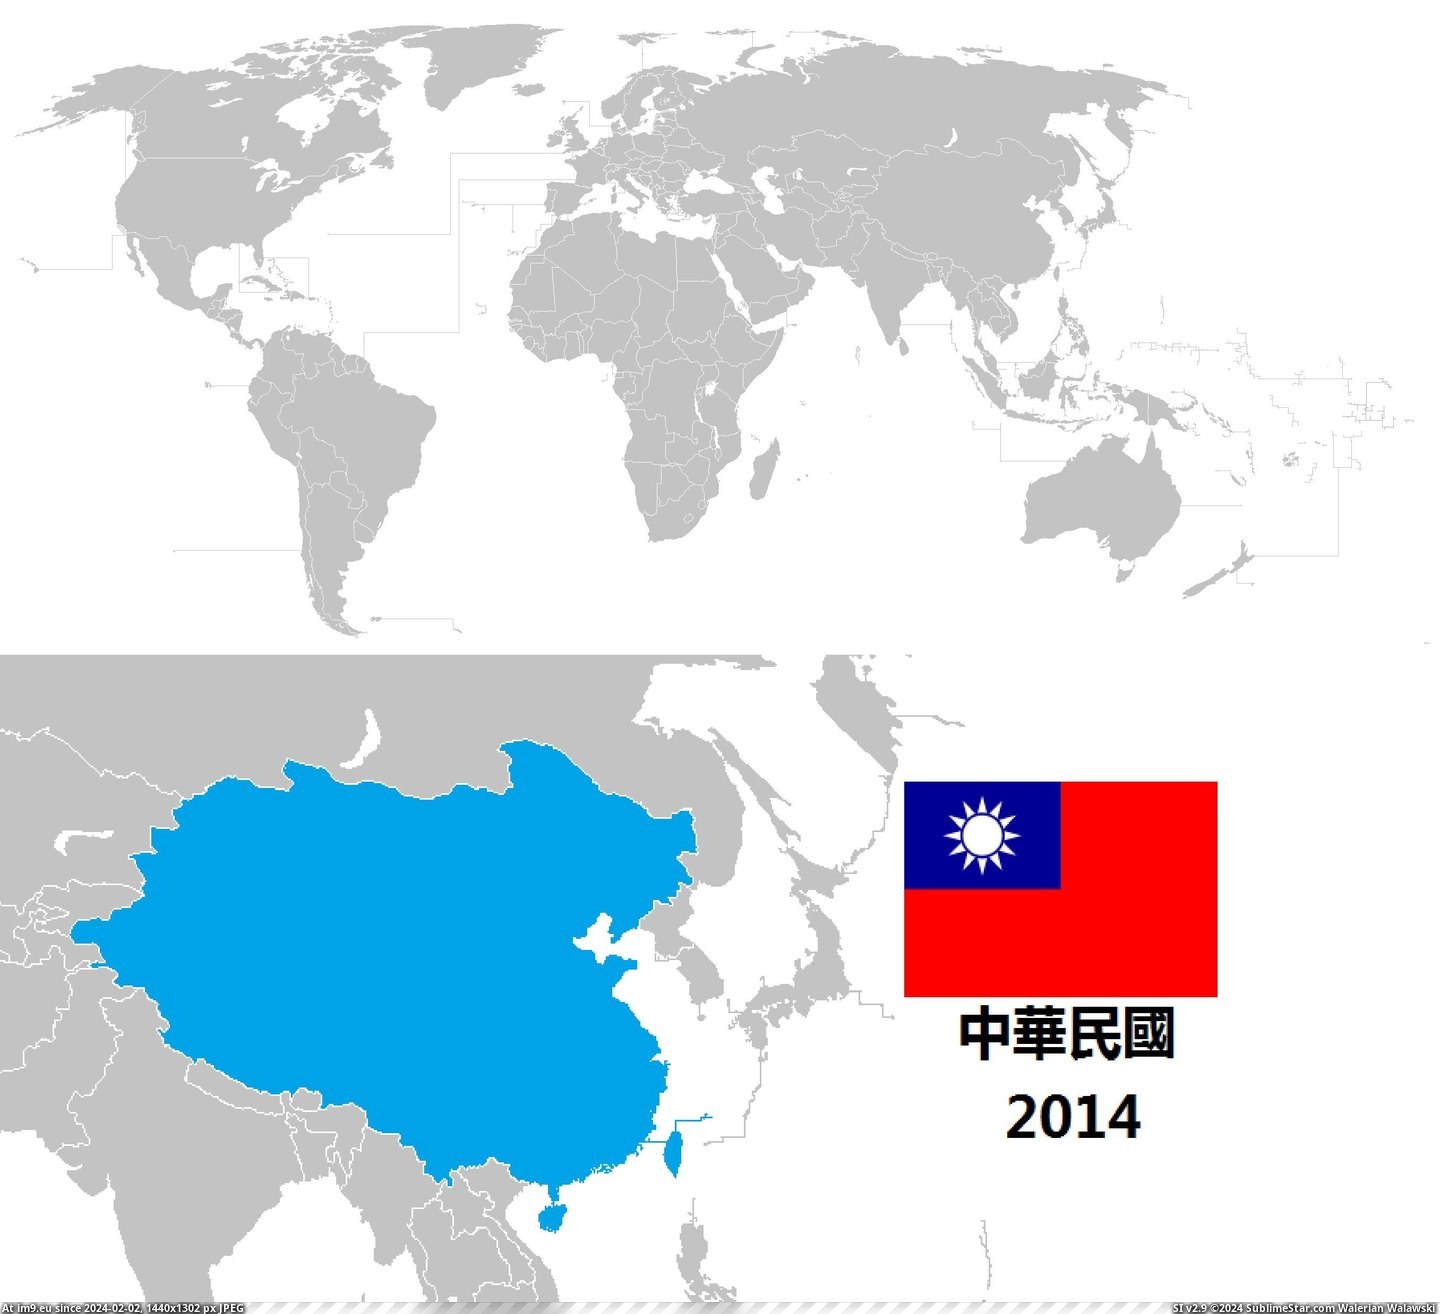 #World #May #Due #Territorial #Boredom #Accura #Based #Claims #Taiwan [Mapporn] The World according to Taiwan, i made due to boredom, based on all of their territorial claims, may not be 100% accura Pic. (Image of album My r/MAPS favs))